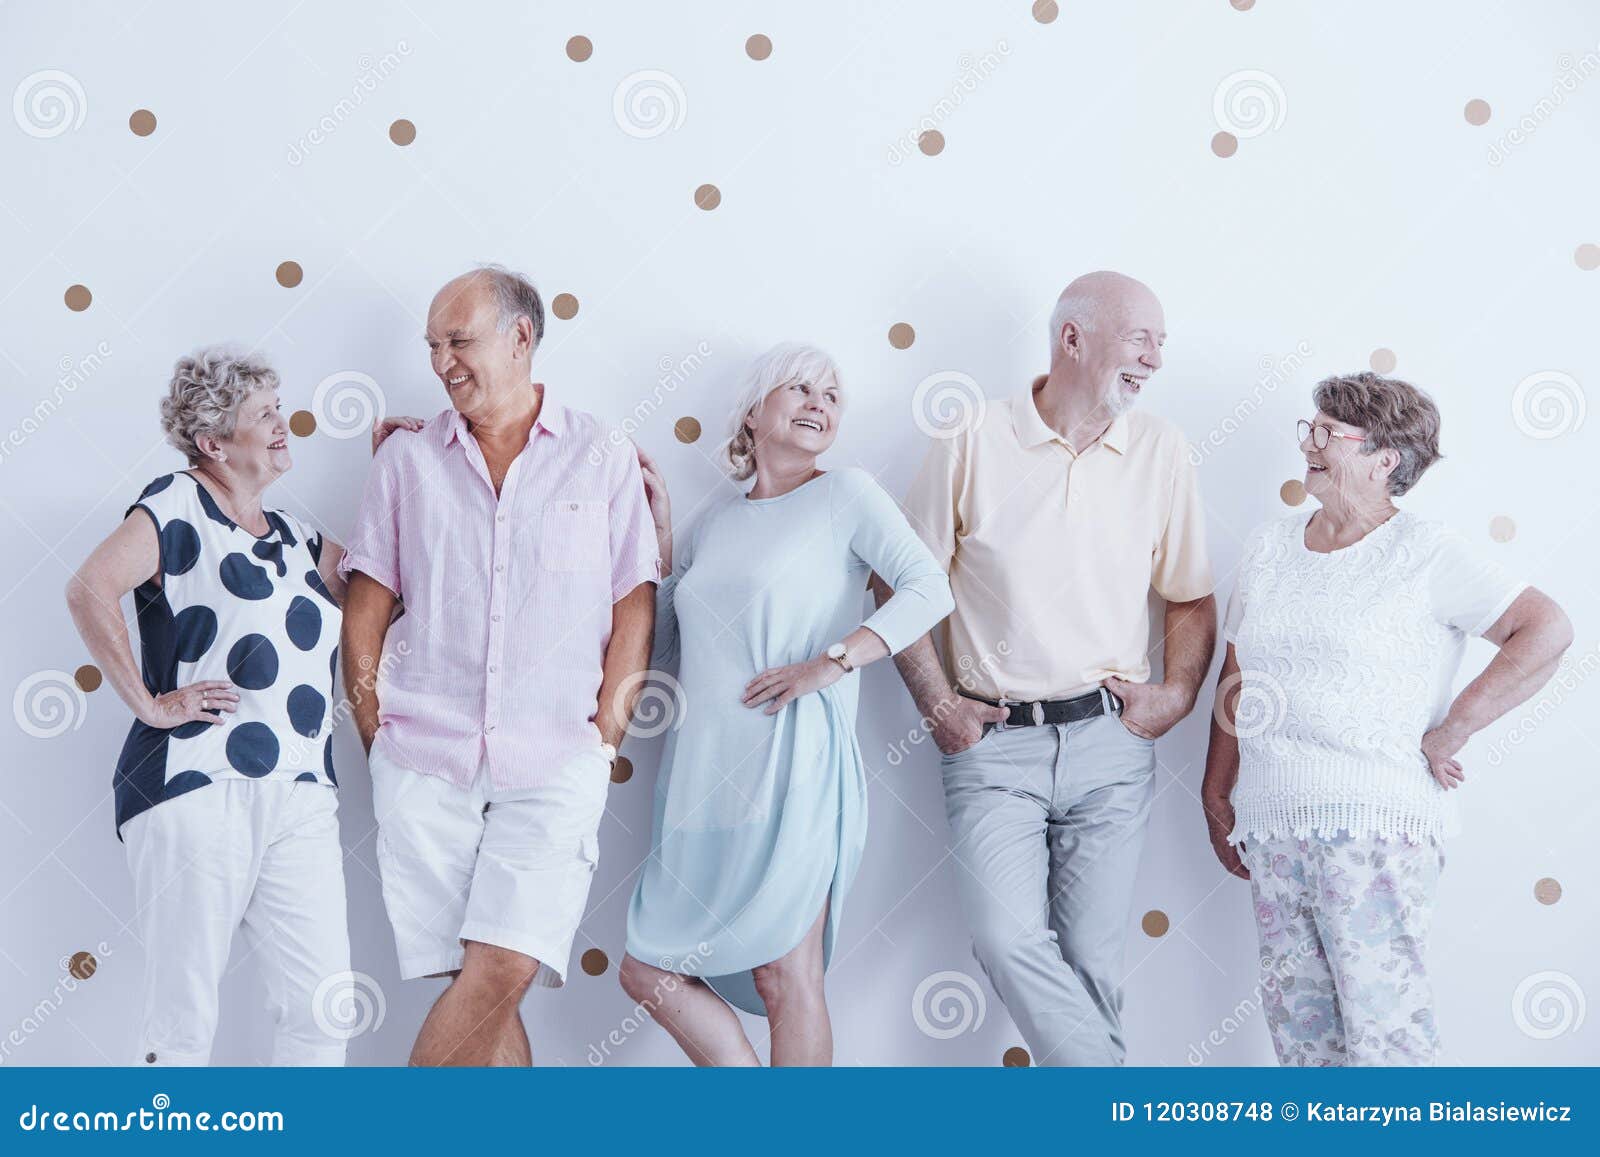 enthusiastic smiling elderly people